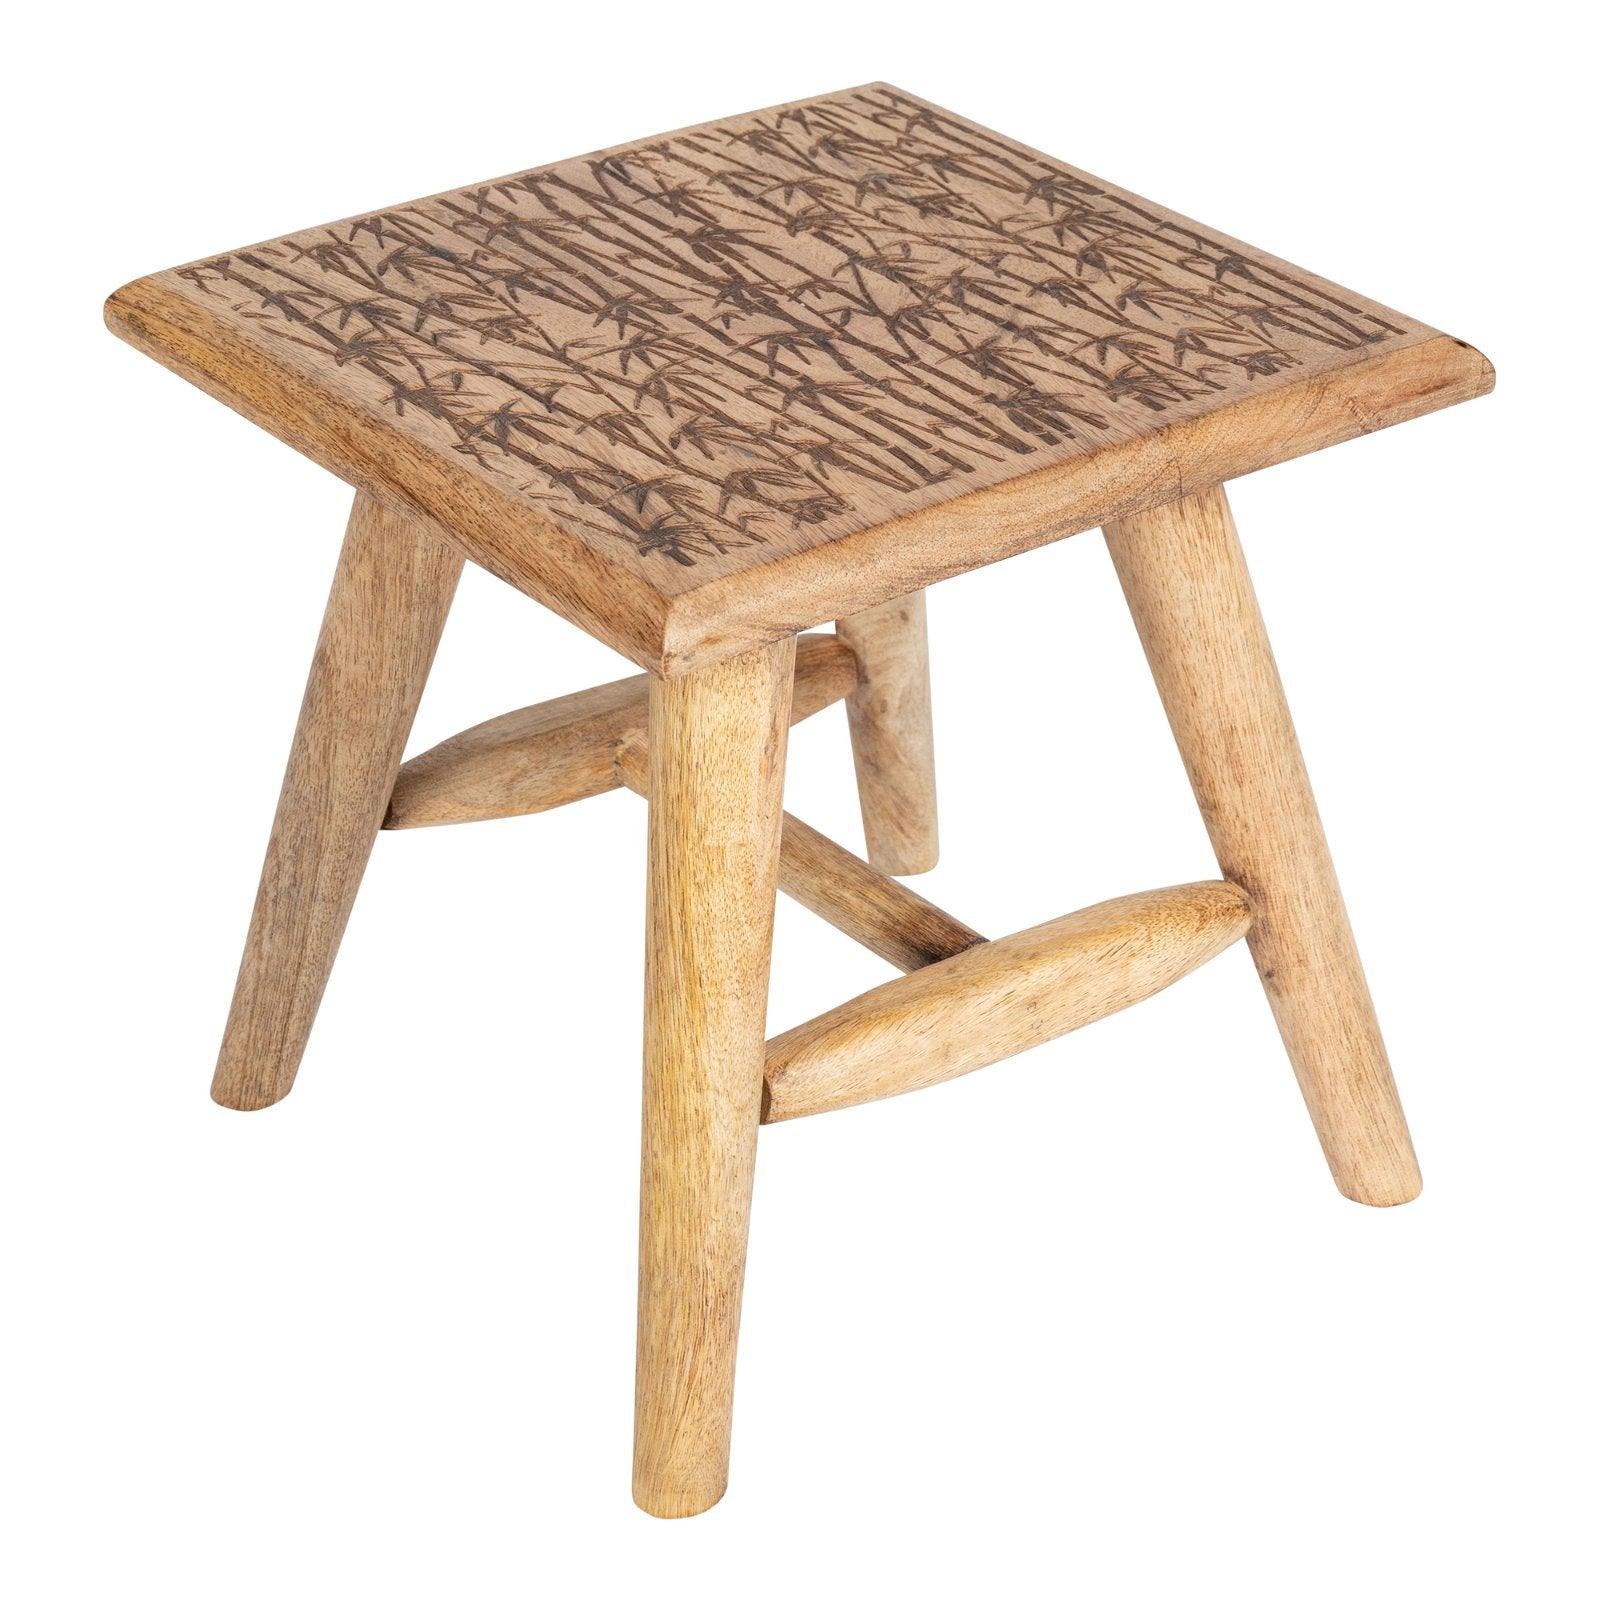 View Bamboo Design Wooden Stool 25cm information